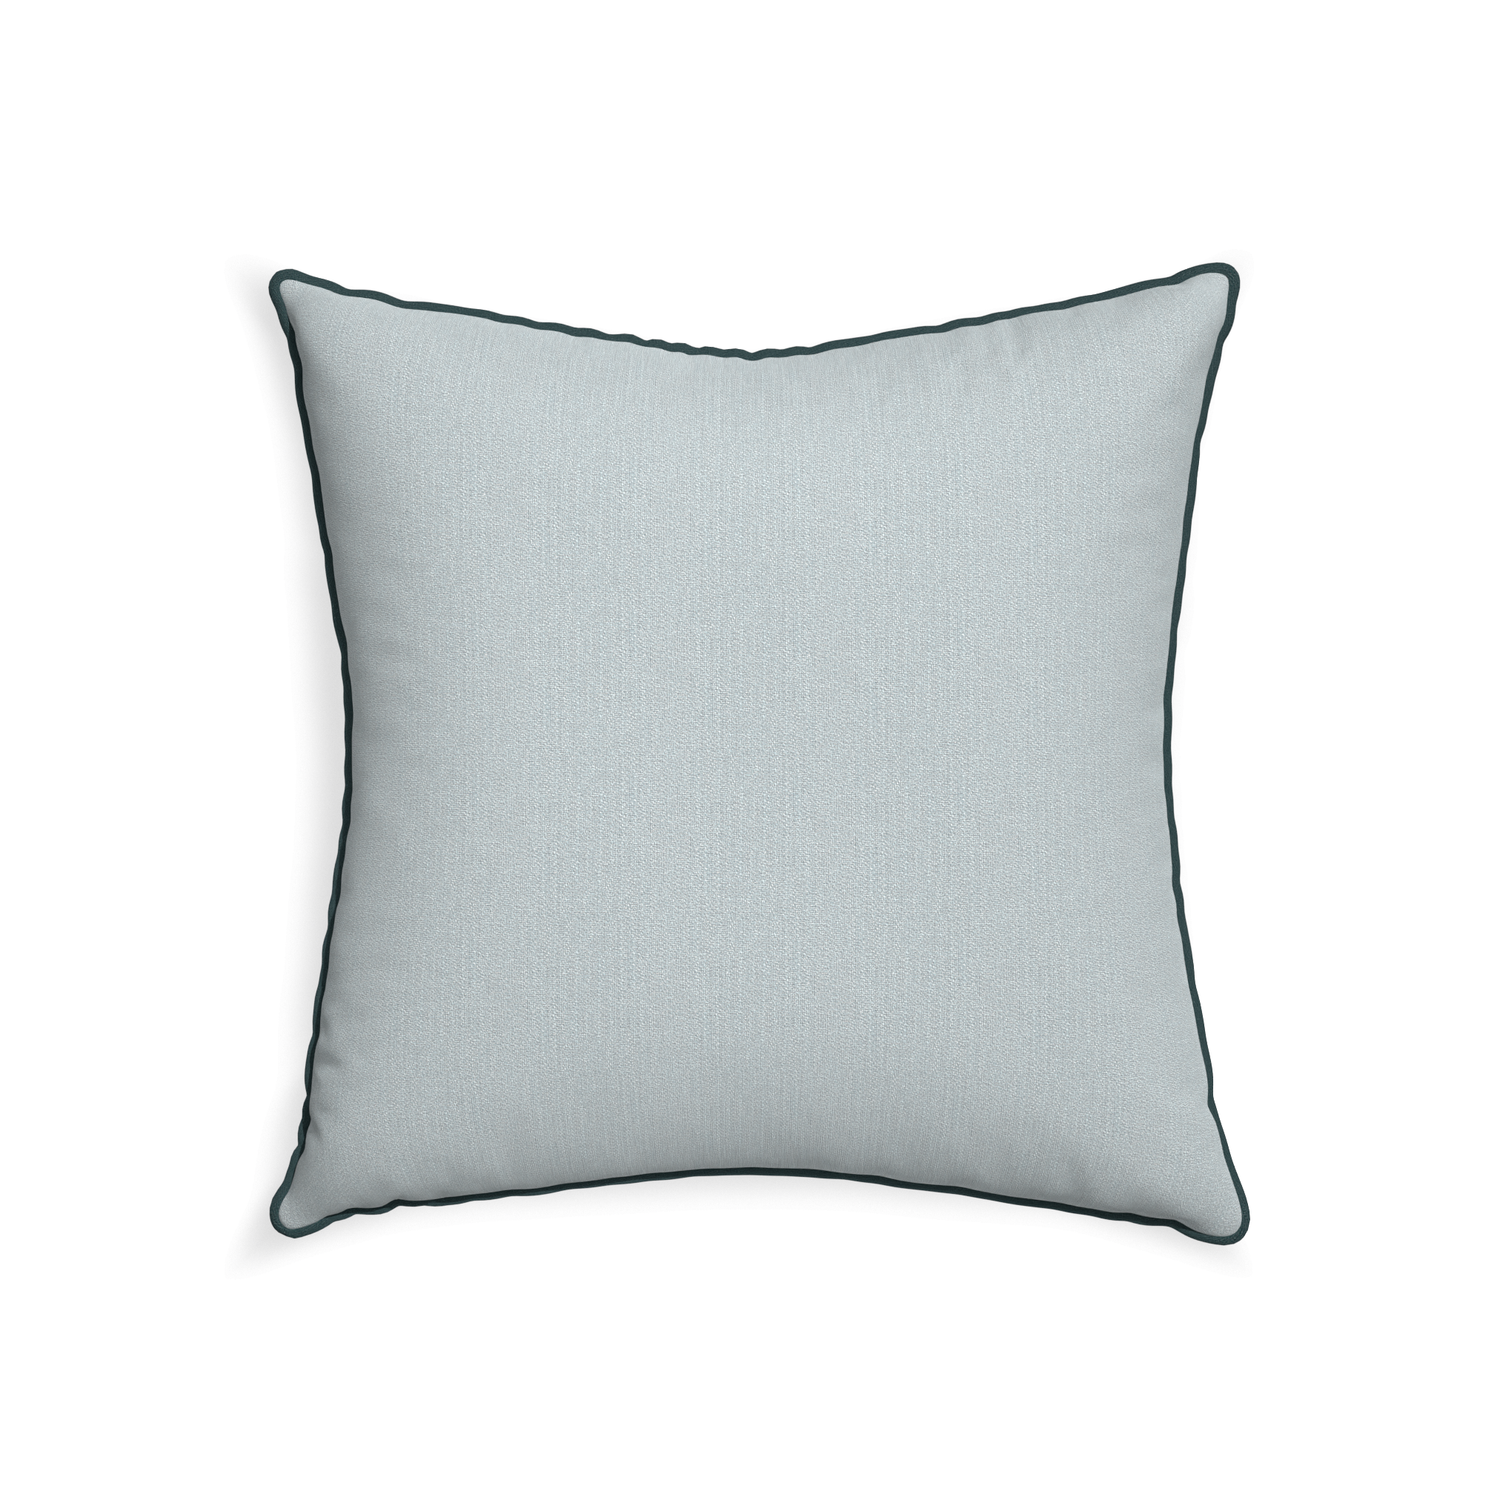 22-square sea custom grey bluepillow with p piping on white background